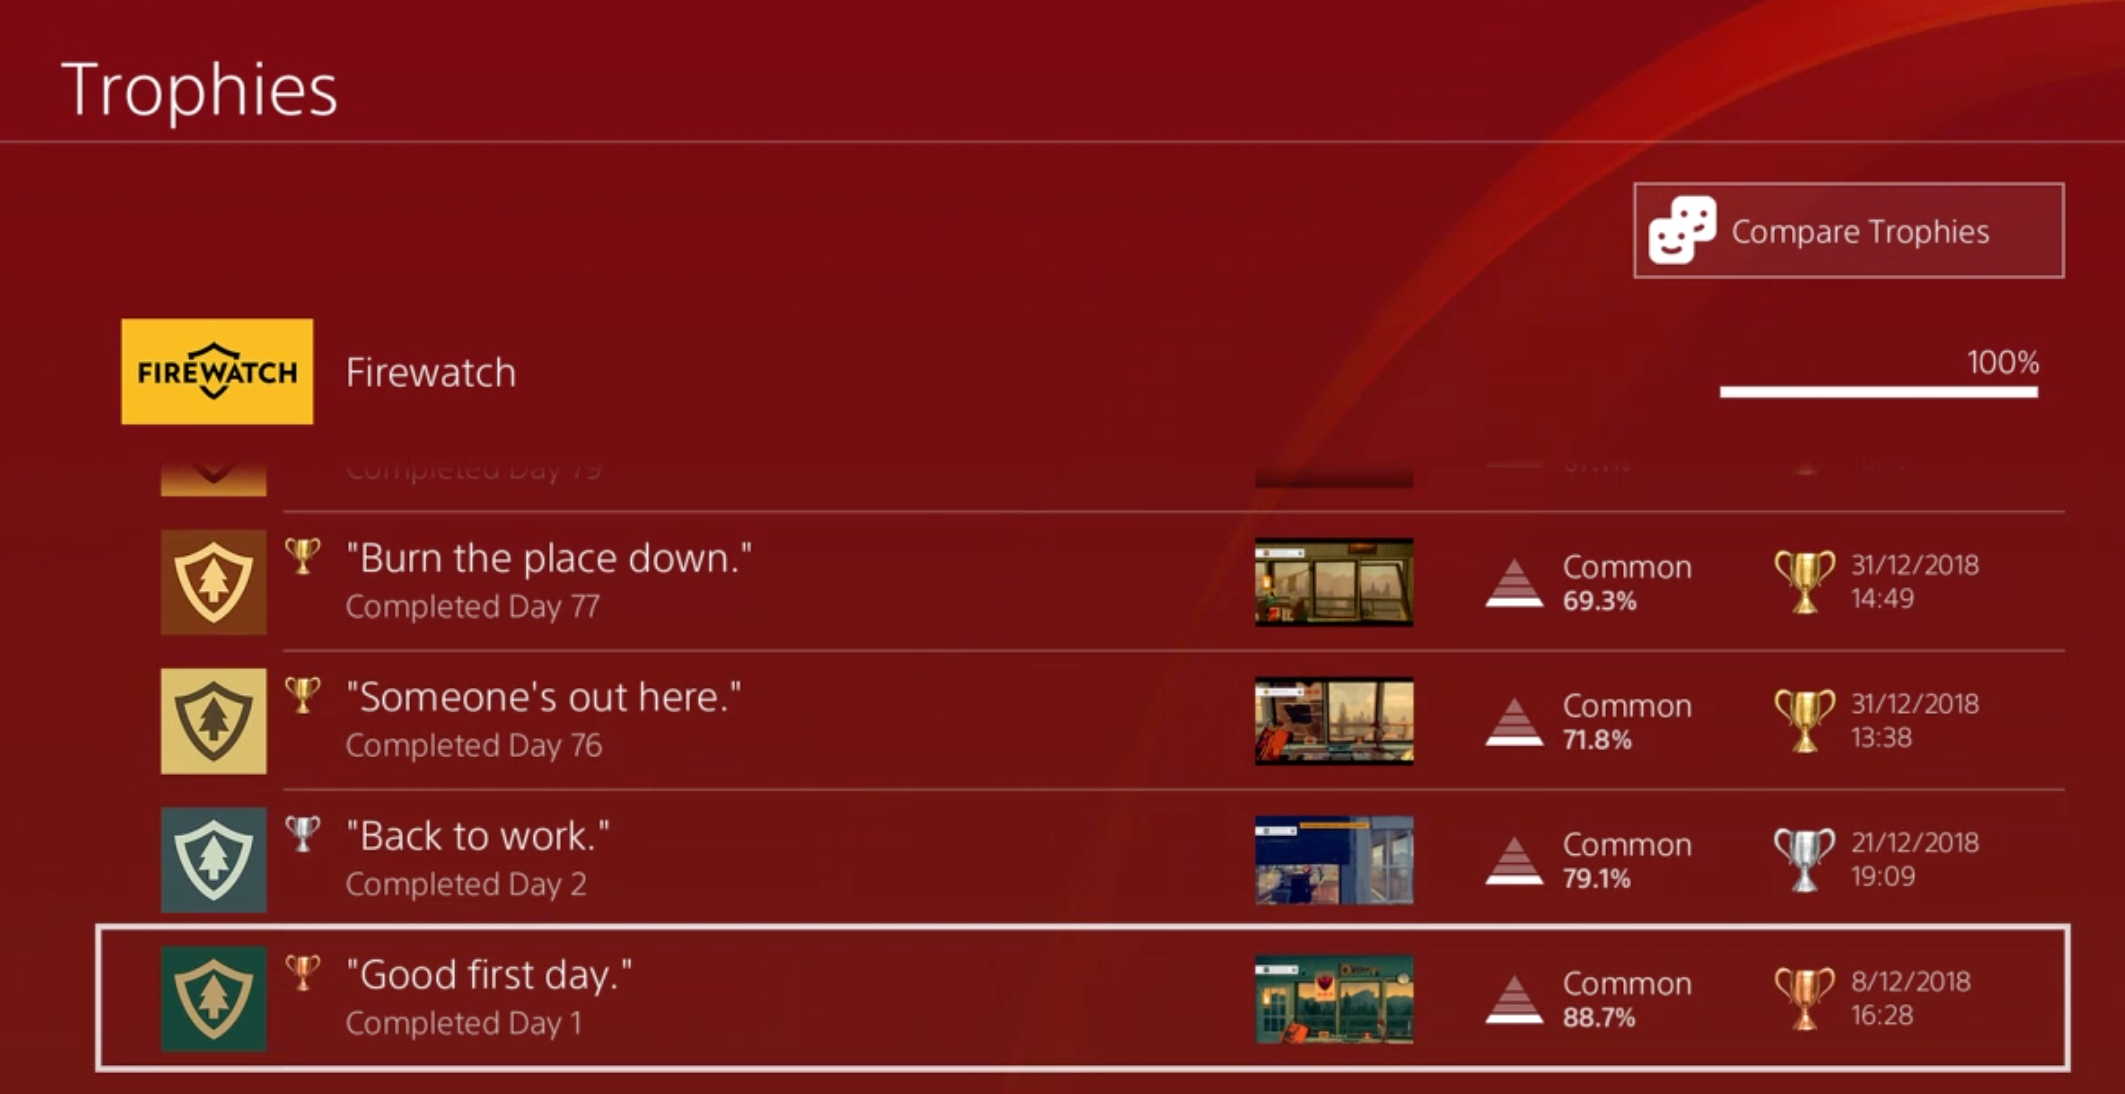 Playstation 4 trophies page for Firewatch showing four achieved trophies